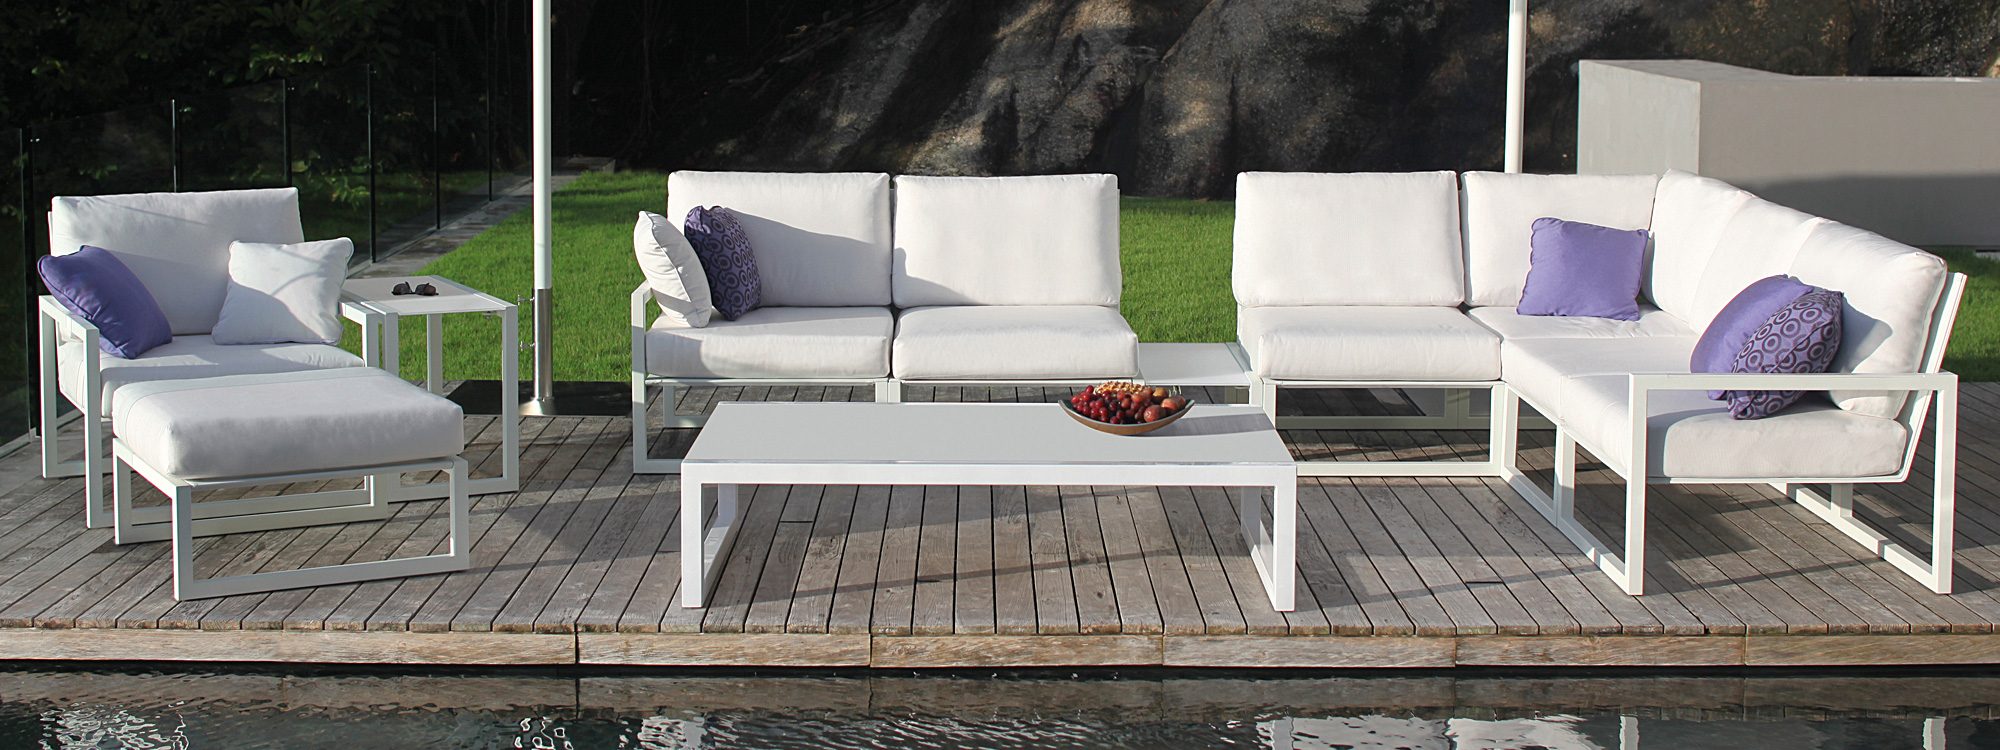 White Ninix outdoor furniture from Encompassco